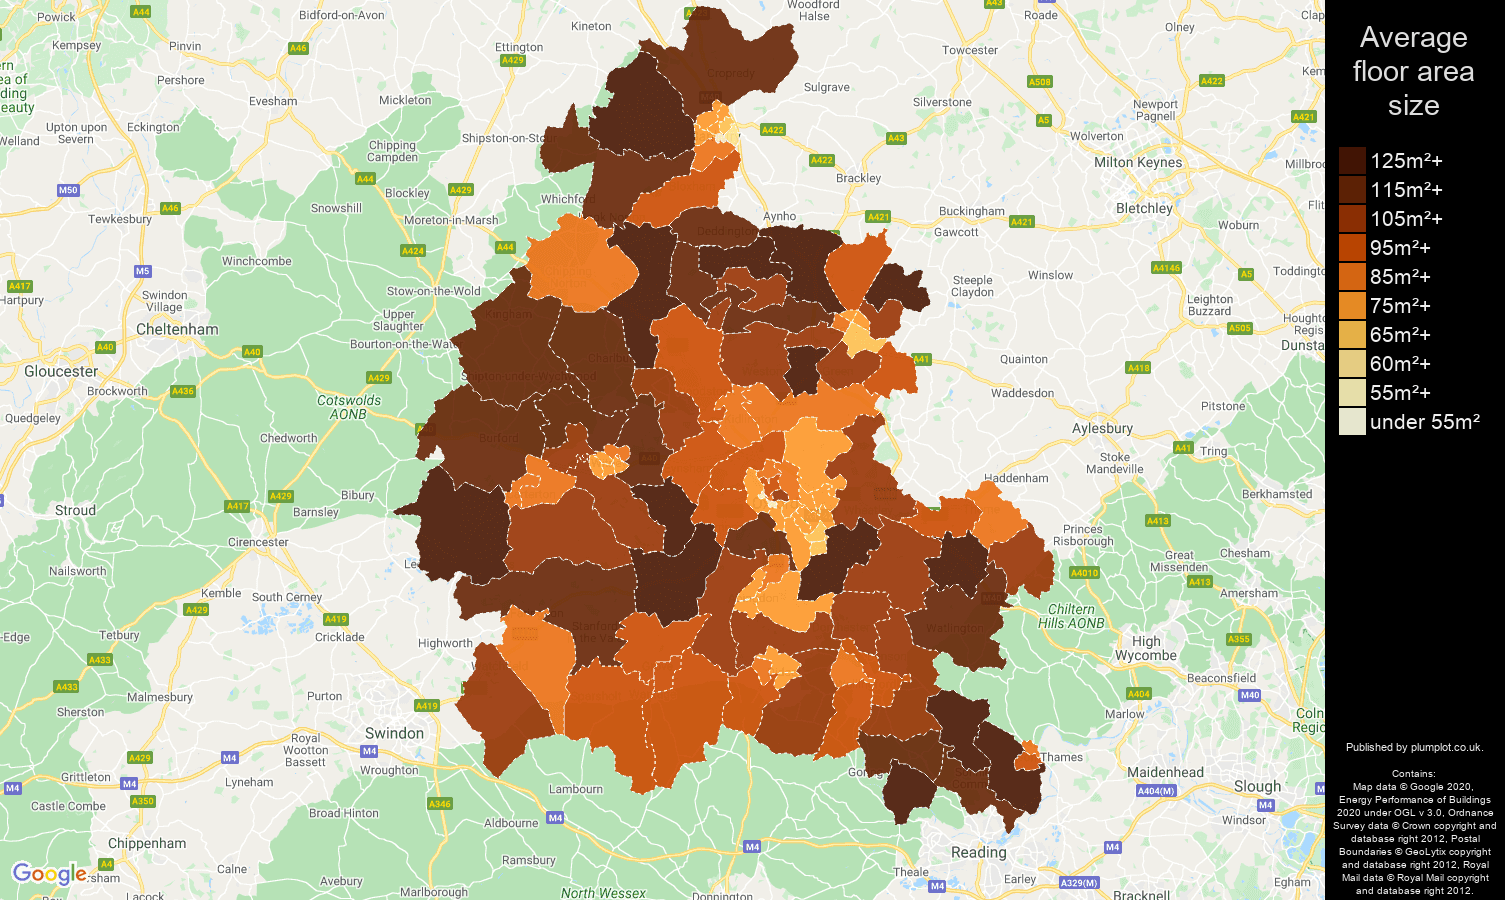 Oxfordshire map of average floor area size of properties